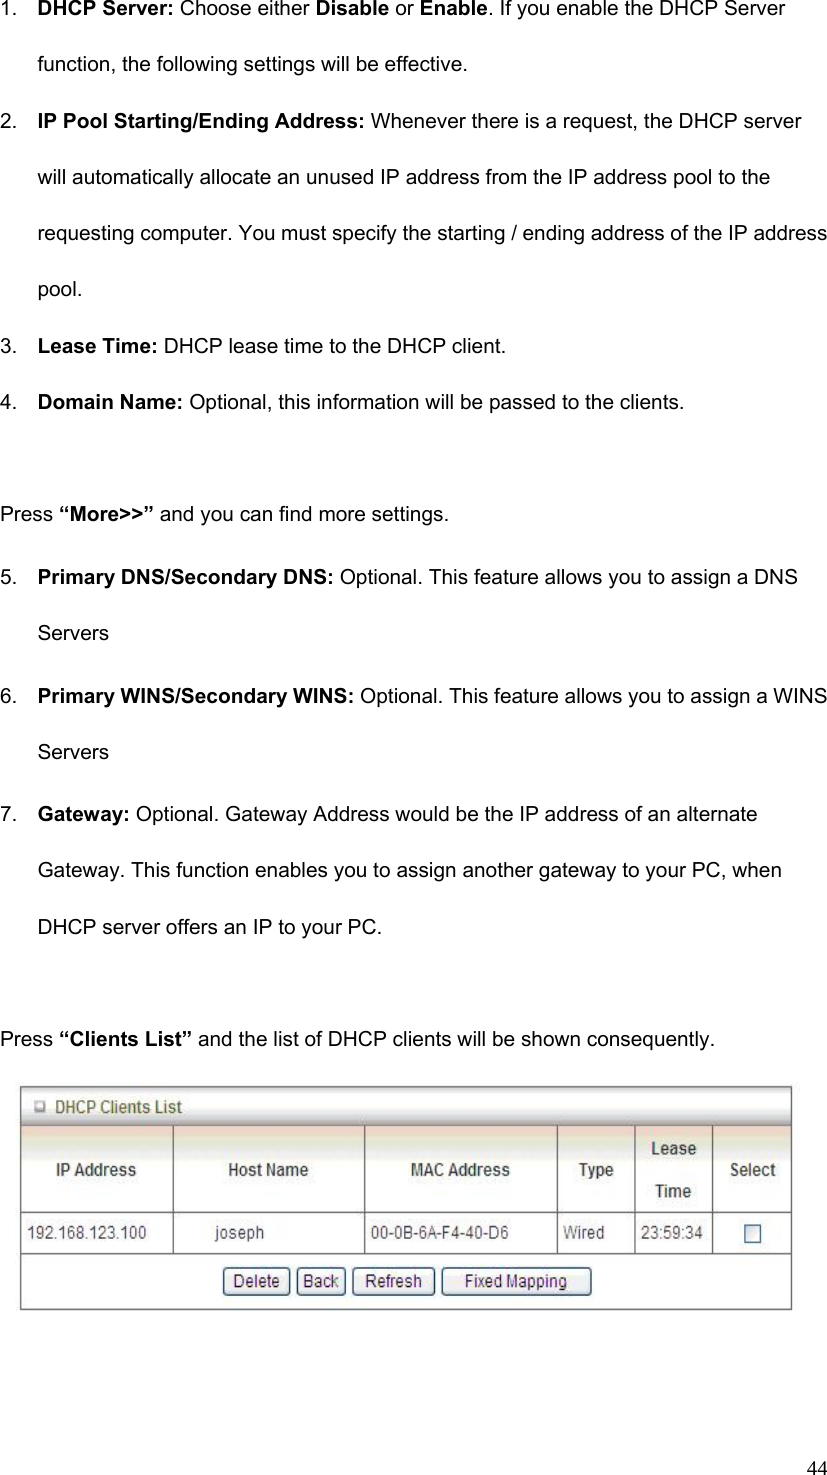  441.  DHCP Server: Choose either Disable or Enable. If you enable the DHCP Server function, the following settings will be effective. 2.  IP Pool Starting/Ending Address: Whenever there is a request, the DHCP server will automatically allocate an unused IP address from the IP address pool to the requesting computer. You must specify the starting / ending address of the IP address pool. 3.  Lease Time: DHCP lease time to the DHCP client. 4.  Domain Name: Optional, this information will be passed to the clients.  Press “More&gt;&gt;” and you can find more settings. 5.  Primary DNS/Secondary DNS: Optional. This feature allows you to assign a DNS Servers 6.  Primary WINS/Secondary WINS: Optional. This feature allows you to assign a WINS Servers 7.  Gateway: Optional. Gateway Address would be the IP address of an alternate Gateway. This function enables you to assign another gateway to your PC, when DHCP server offers an IP to your PC.    Press “Clients List” and the list of DHCP clients will be shown consequently.    